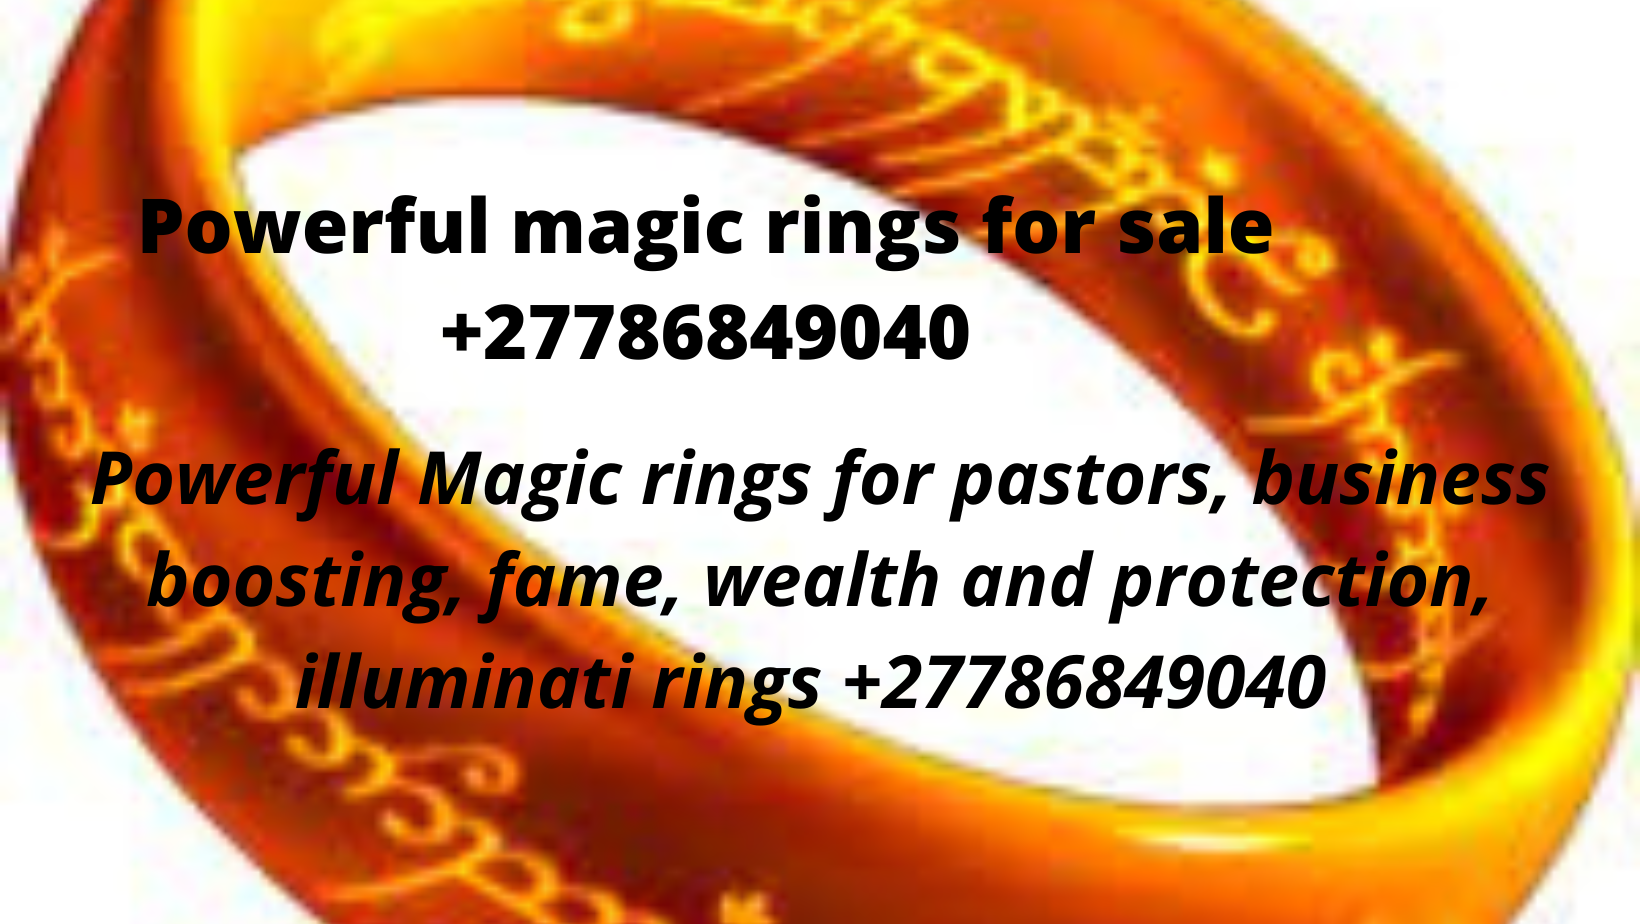 +27786849040 MIRACLE MAGIC RINGS FOR POWER, FAME AND PROTECTION, POWERFUL STRONG MAGIC RING MAGIC WALLET & MONEY SPELL 